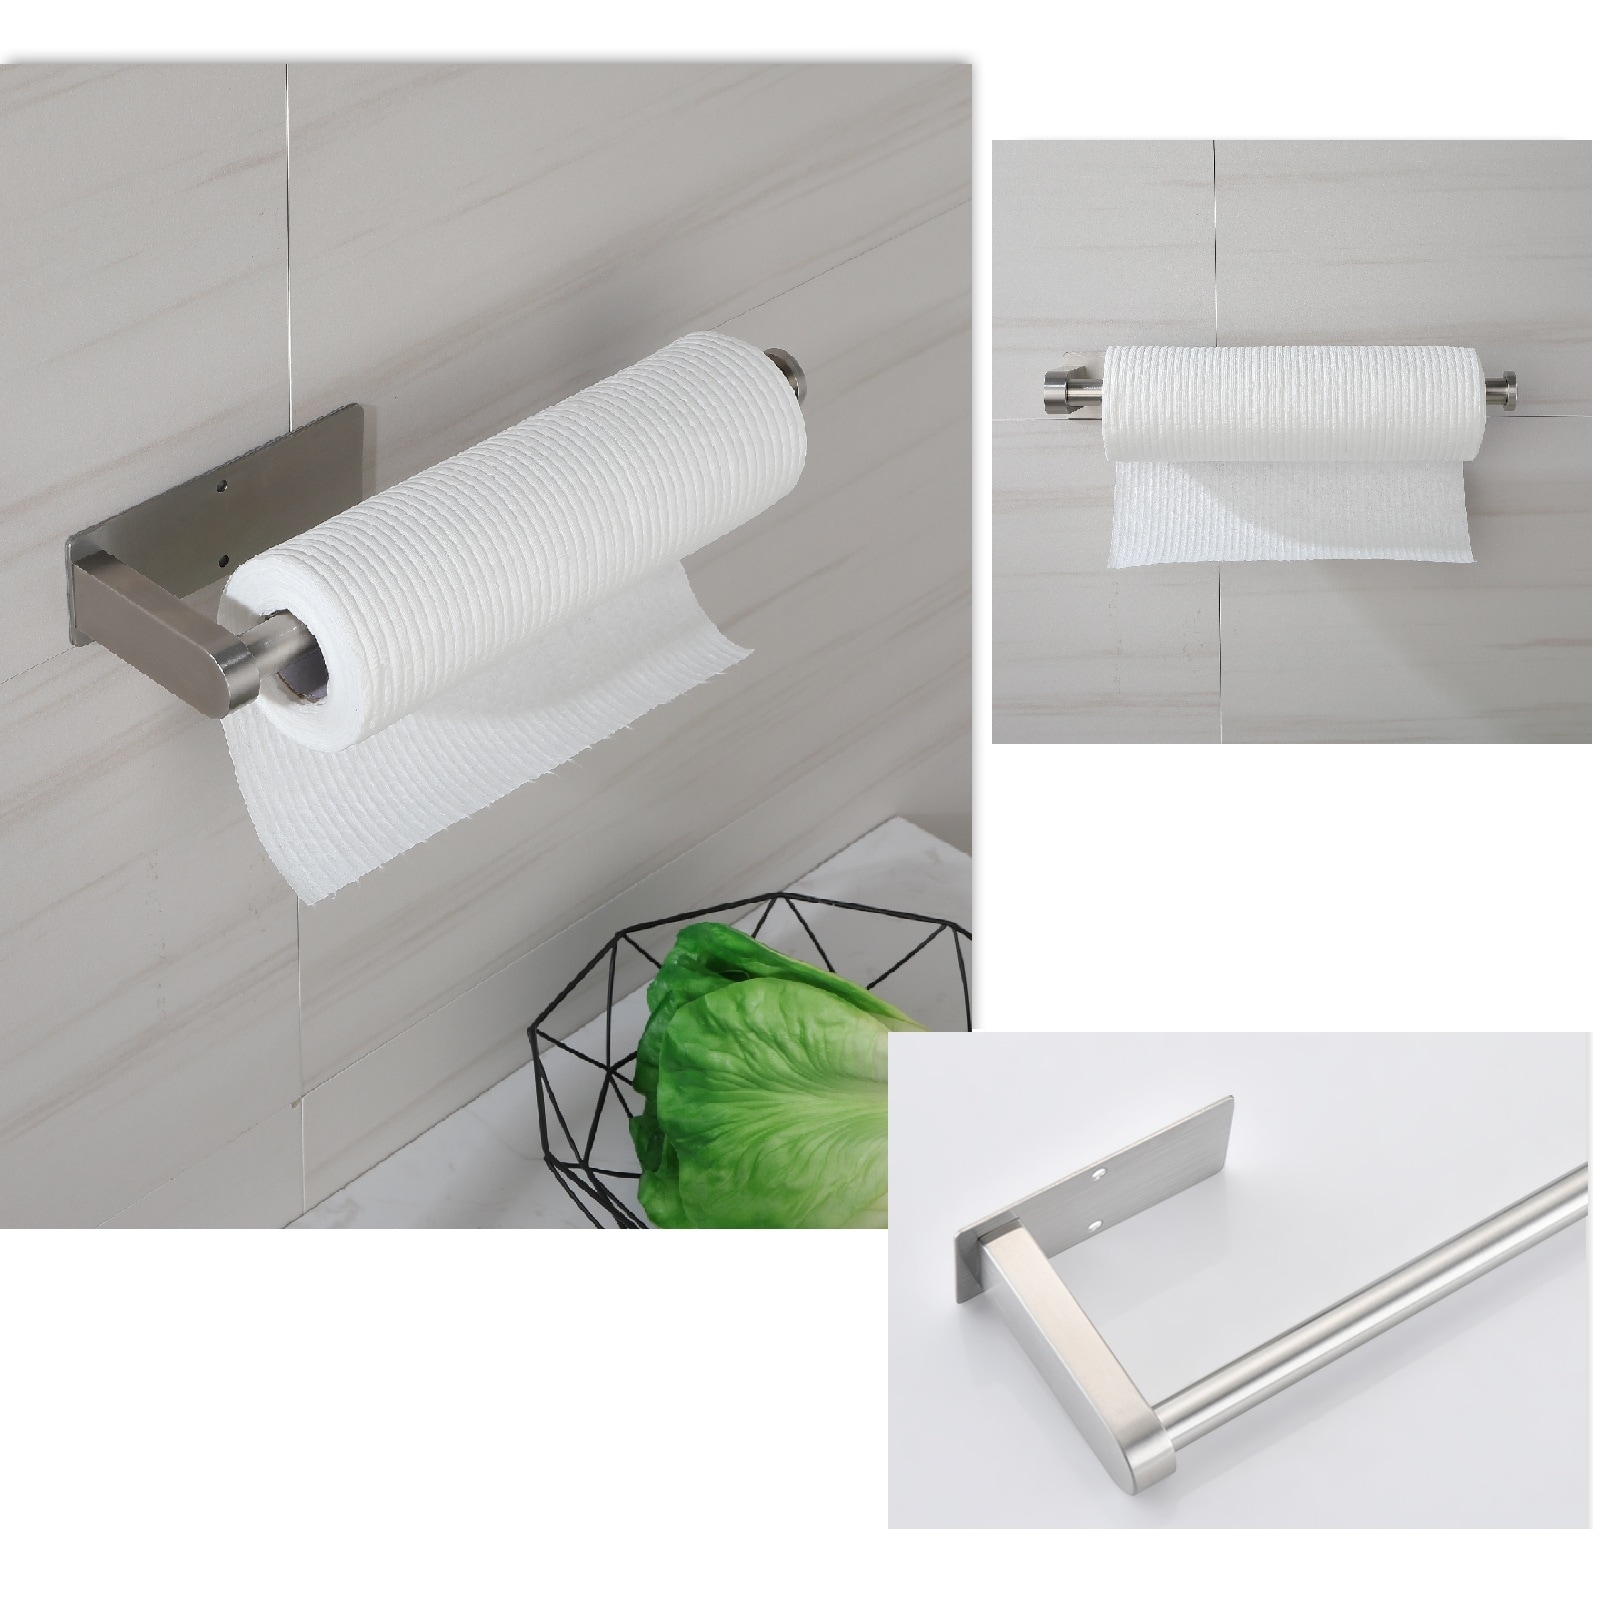 https://ak1.ostkcdn.com/images/products/is/images/direct/f091dec91fdfd63dcbda8d9c11bf1f3956fdf248/2-Piece-Under-Cabinet-Wall-Mount-Paper-Towel-Holder.jpg